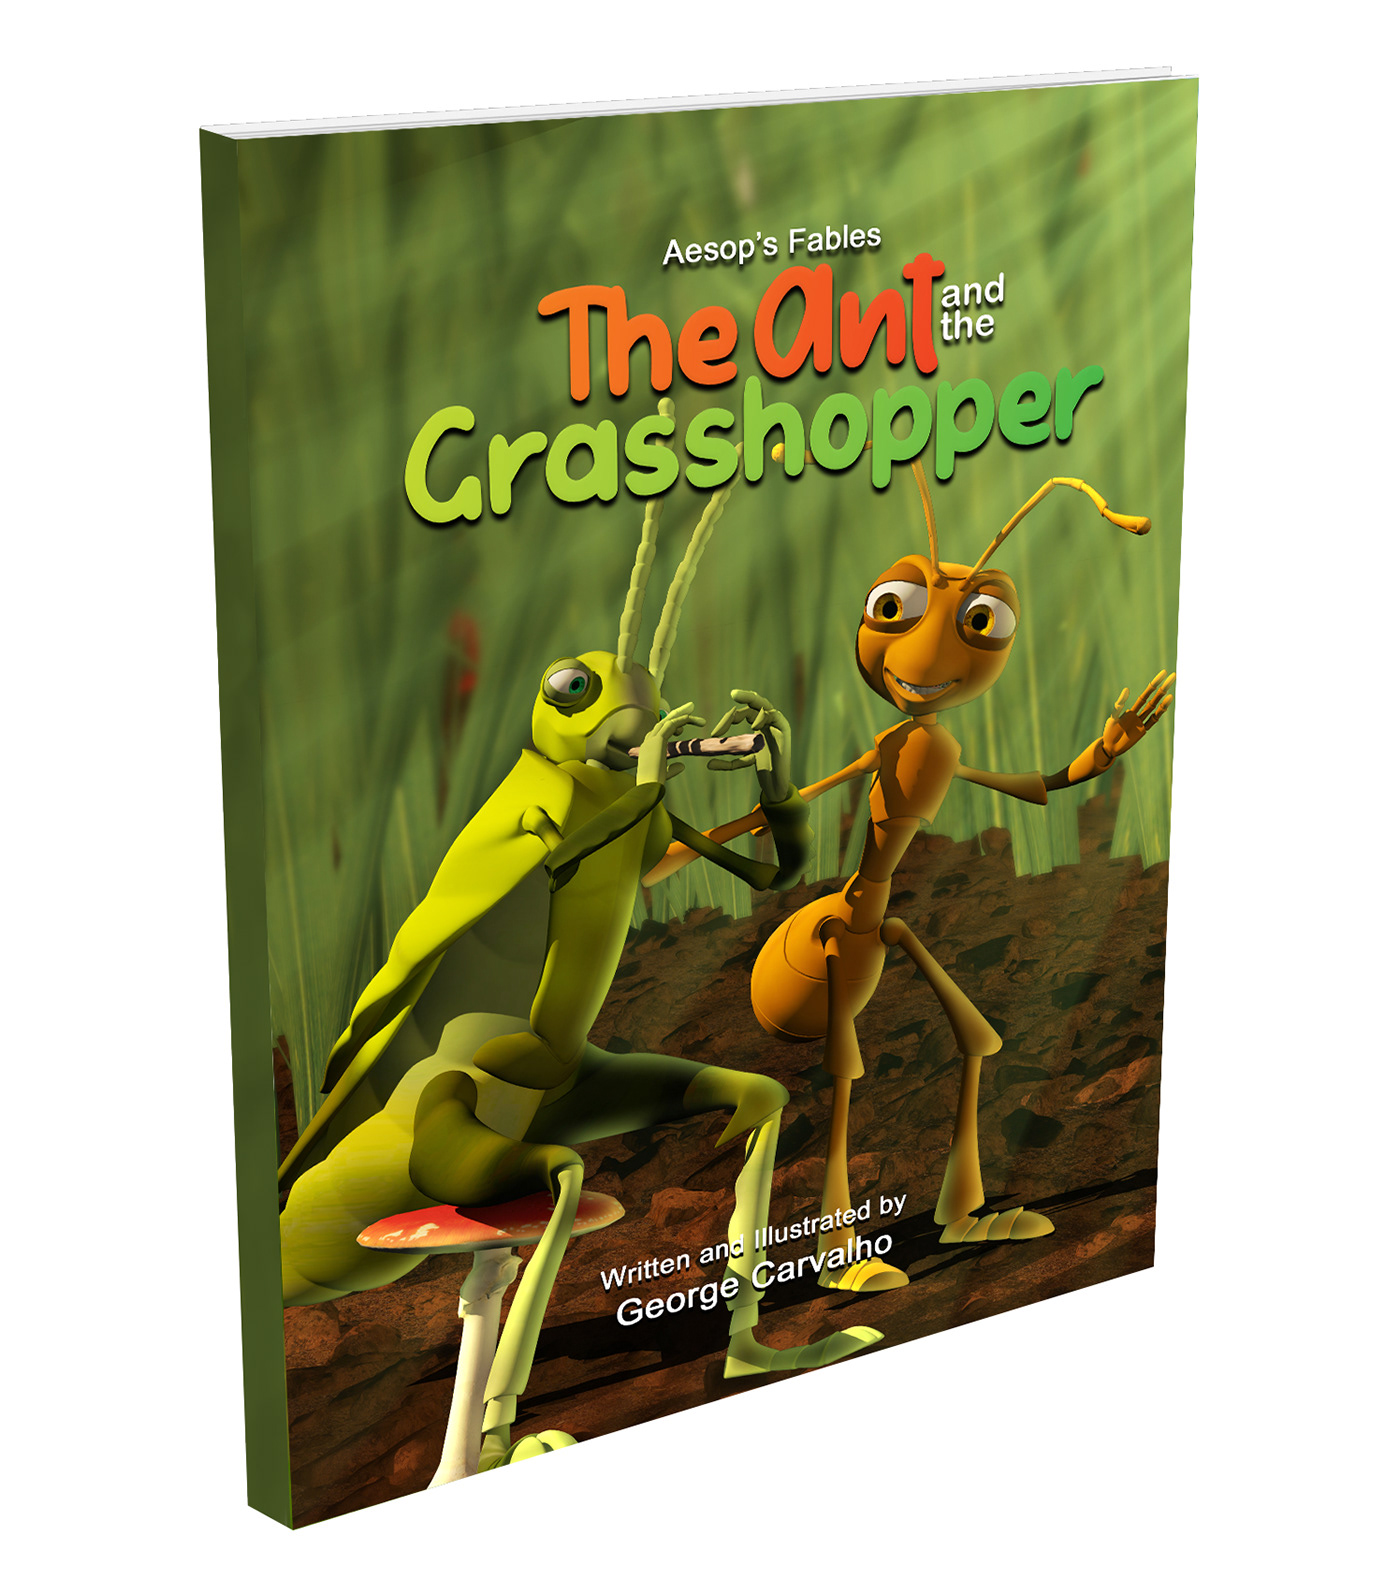 Aesop's Fables The Ant and the Grasshopper on Behance